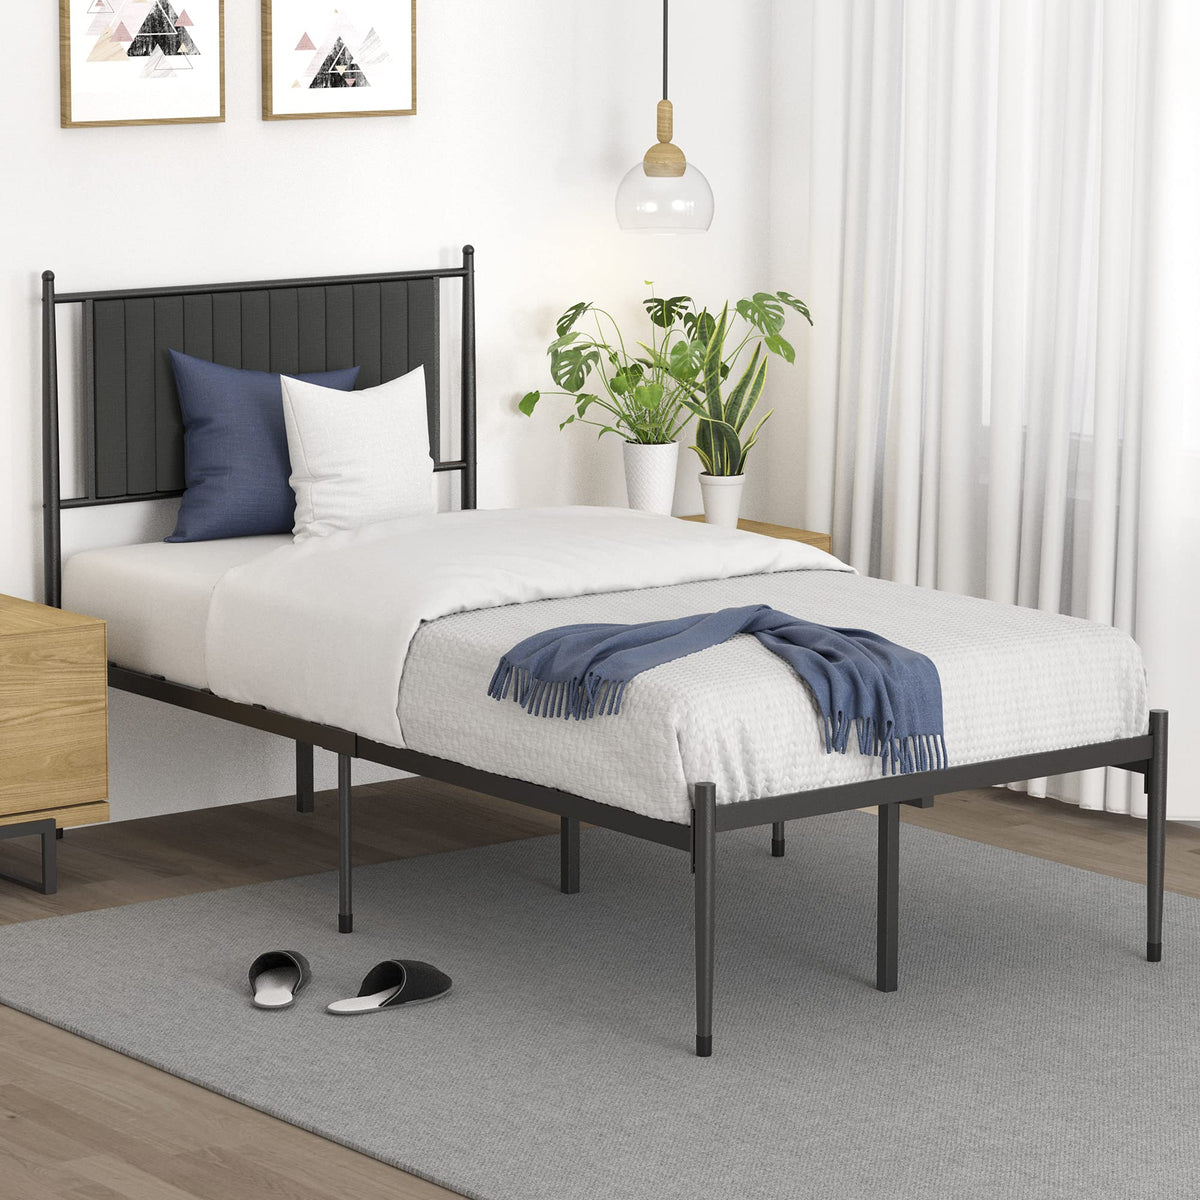 IDEALHOUSE Twin Size Metal Platform Bed Frame with Upholstered Headboard